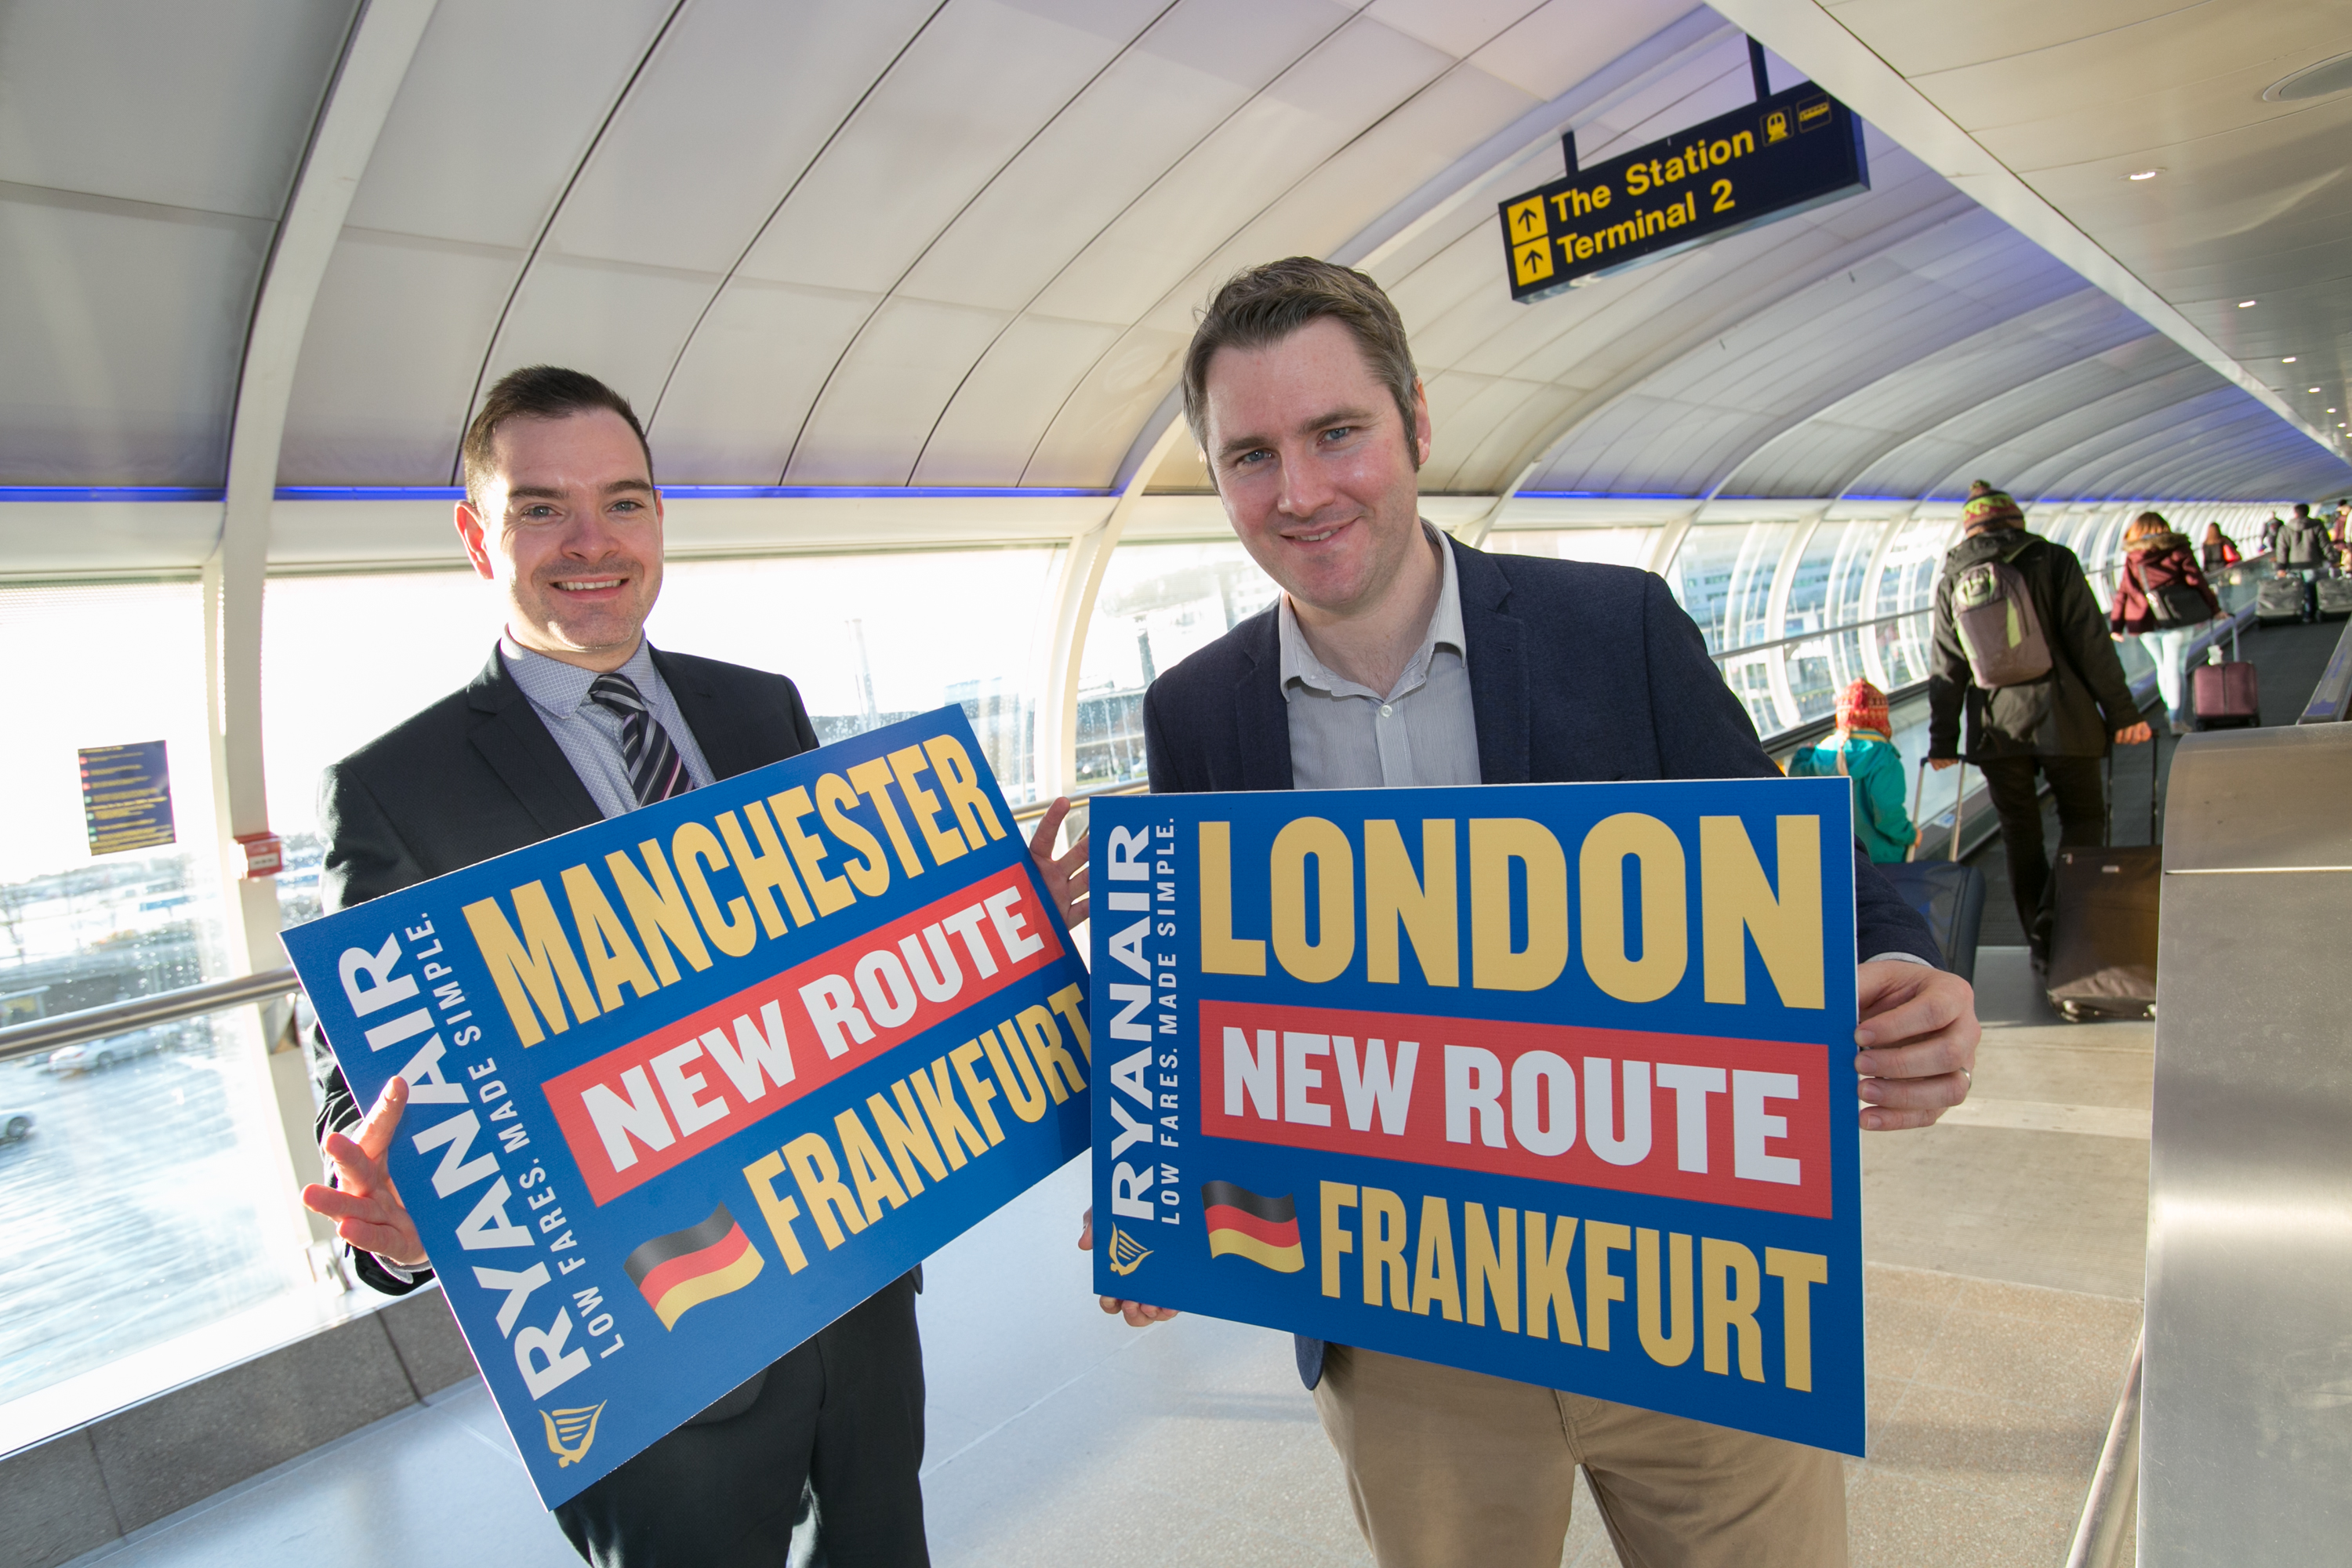 New London & Manchester Routes To Frankfurt Launched